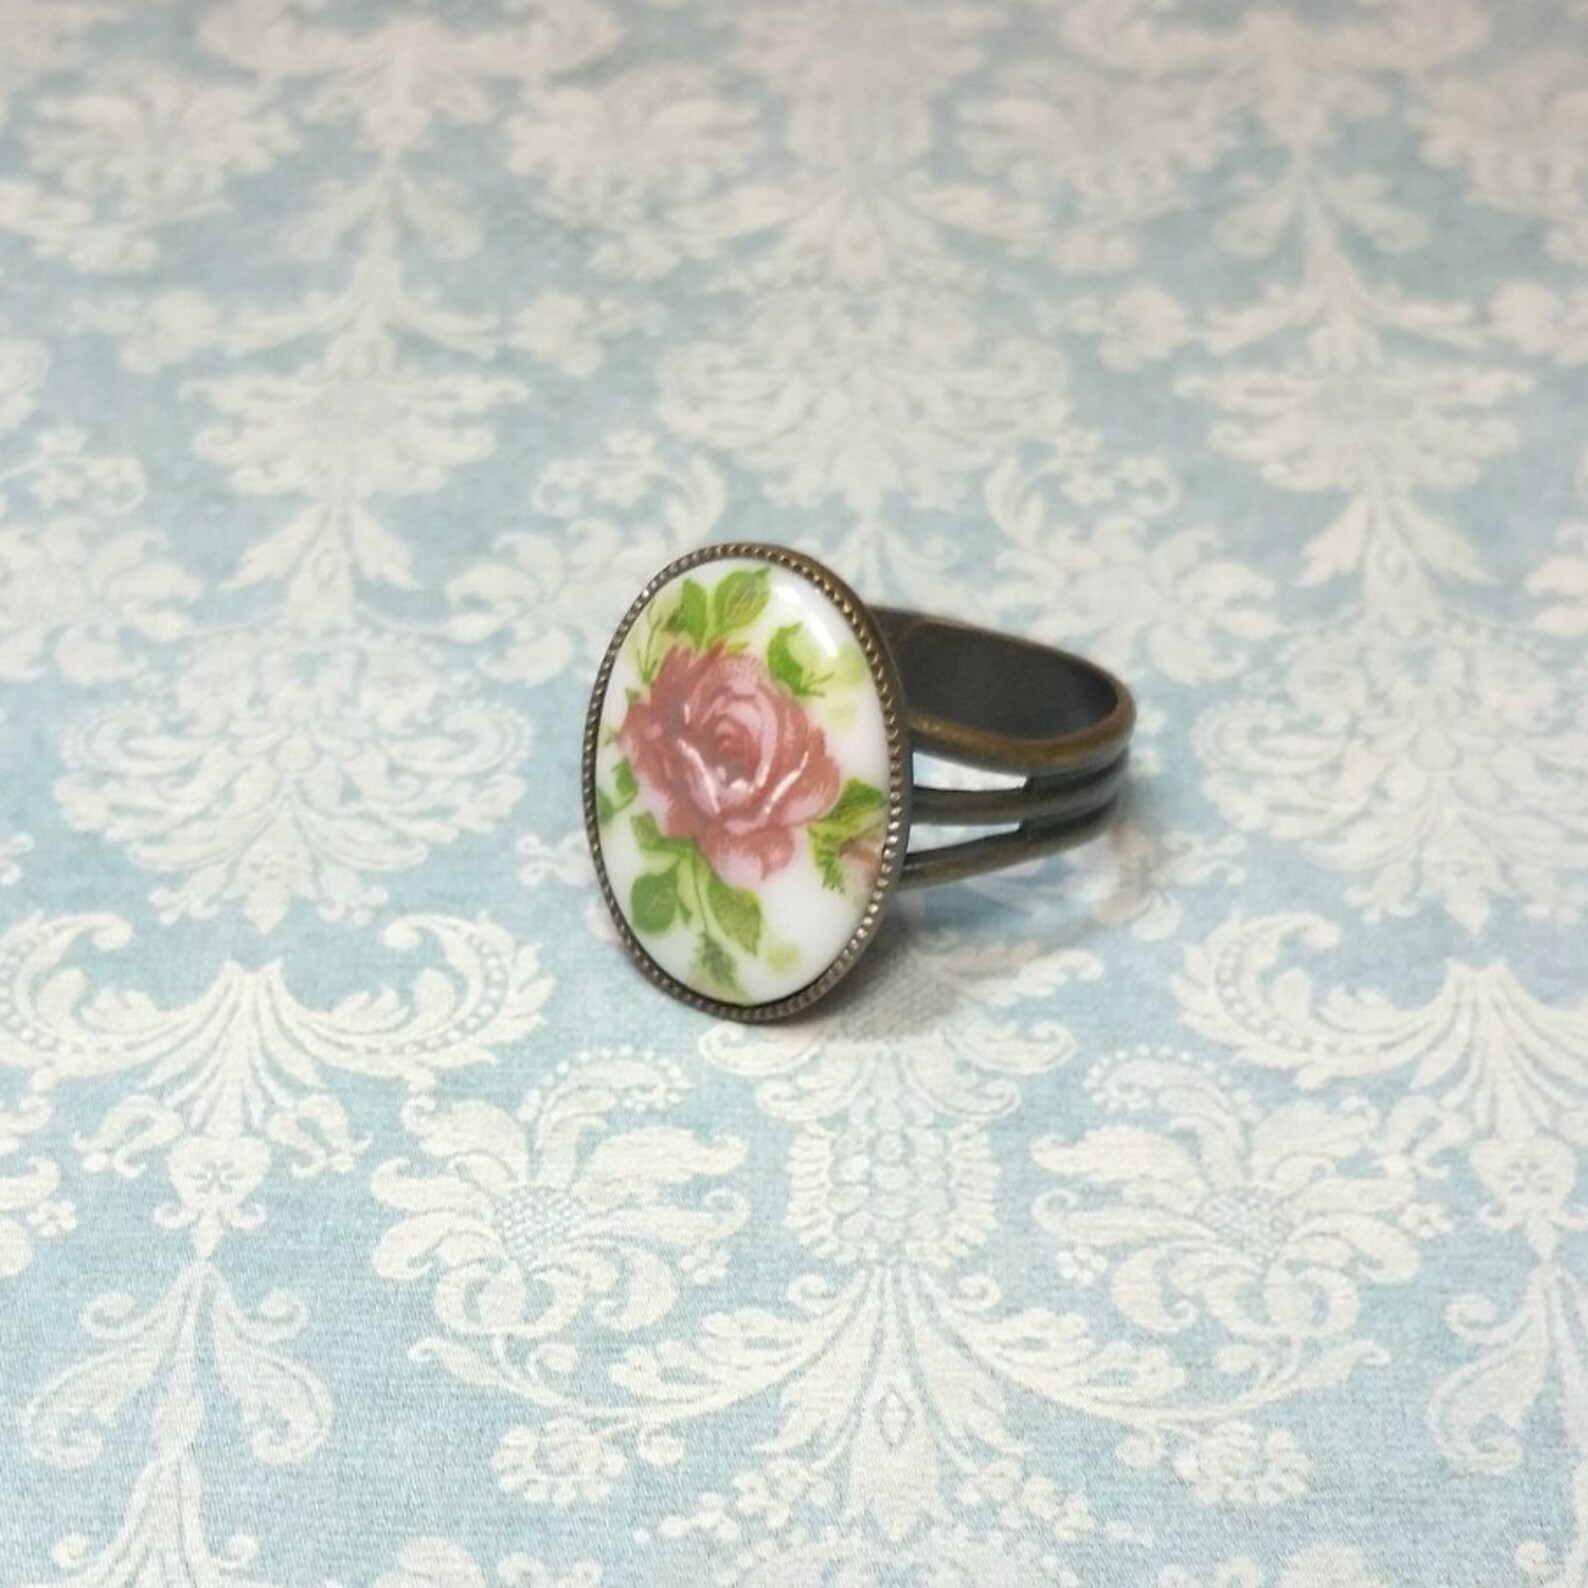 Rose Cameo Ring Vintage Style Ring Antique Style Ring - Etsy